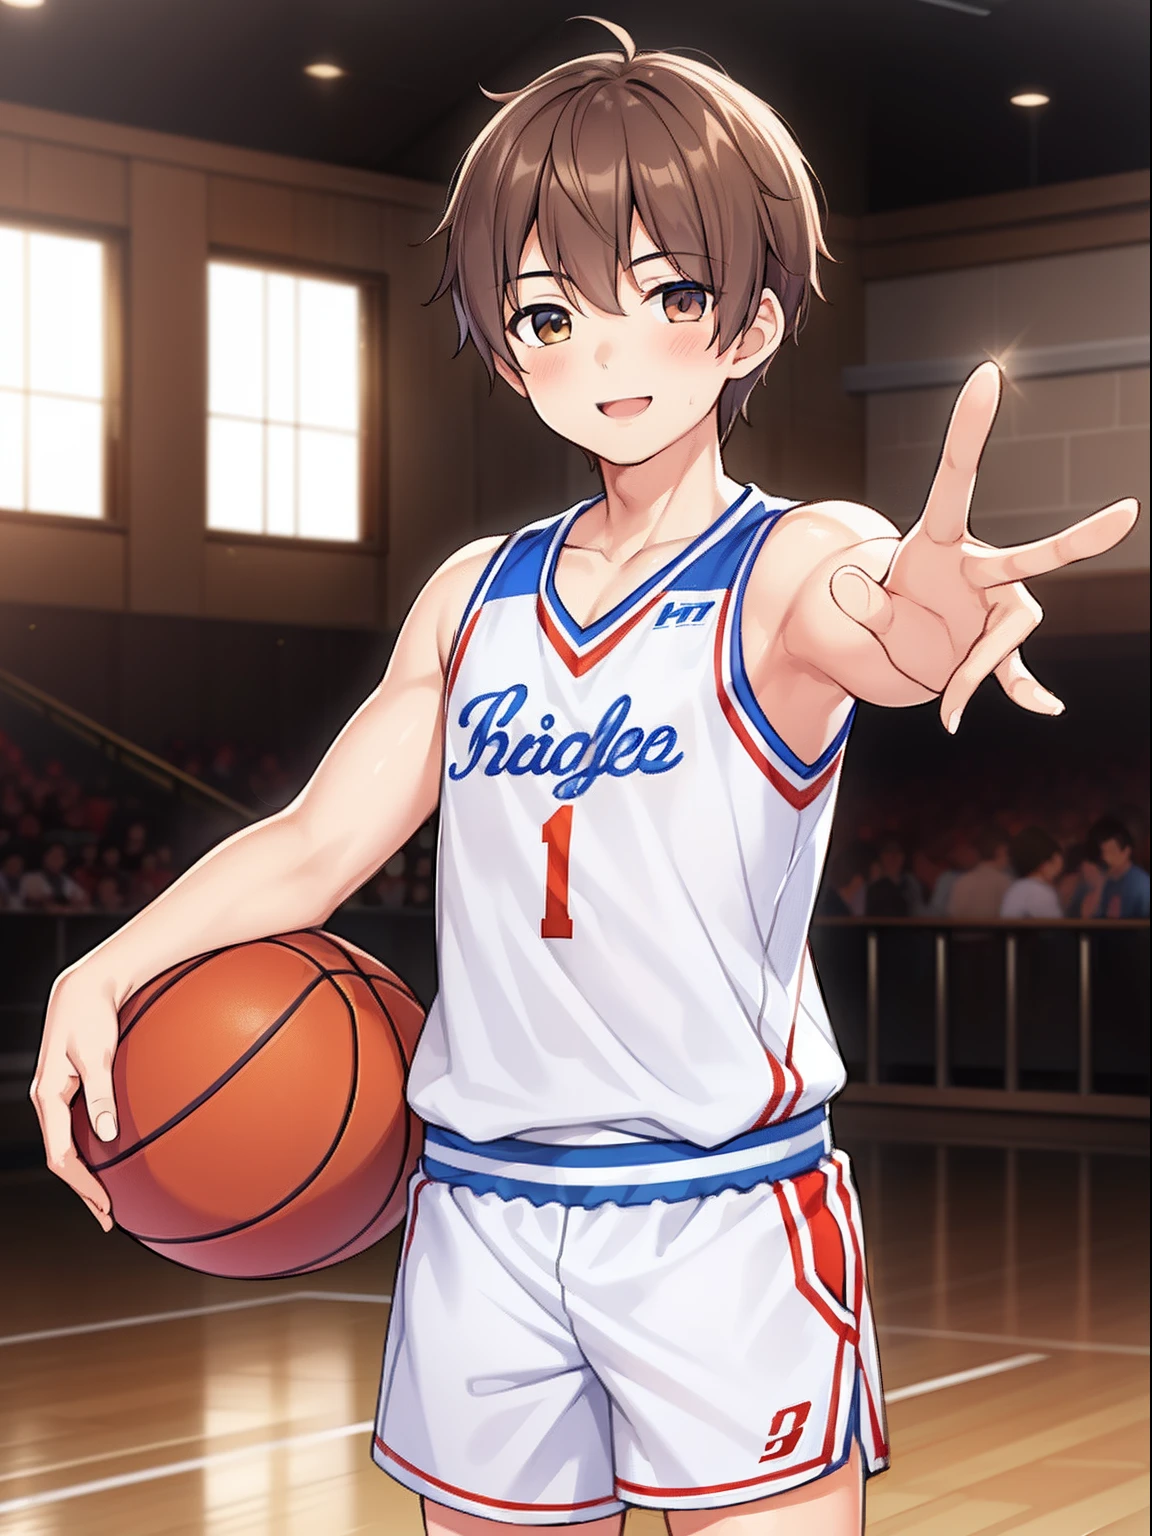 Anime boy in uniform holding a basketball ball and pointing at the ...